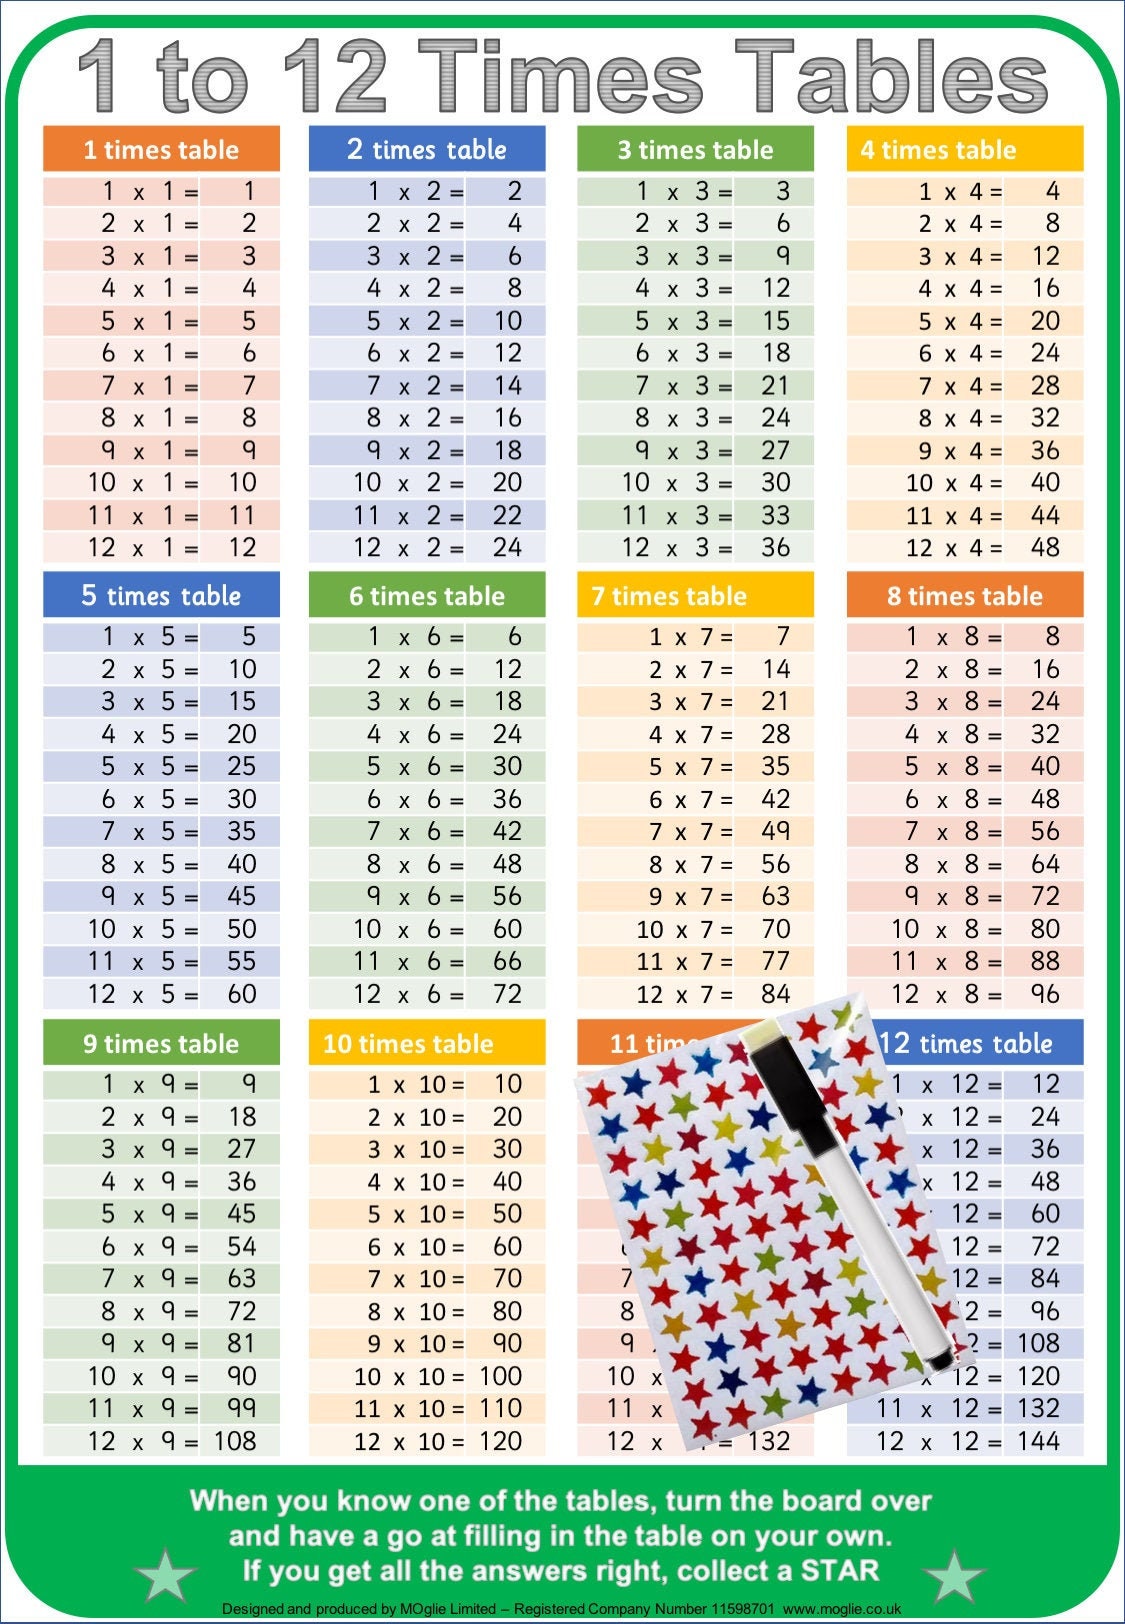 2x F Times Tables Poster Maths Educational Wall Chart Us 099 0xencryptai